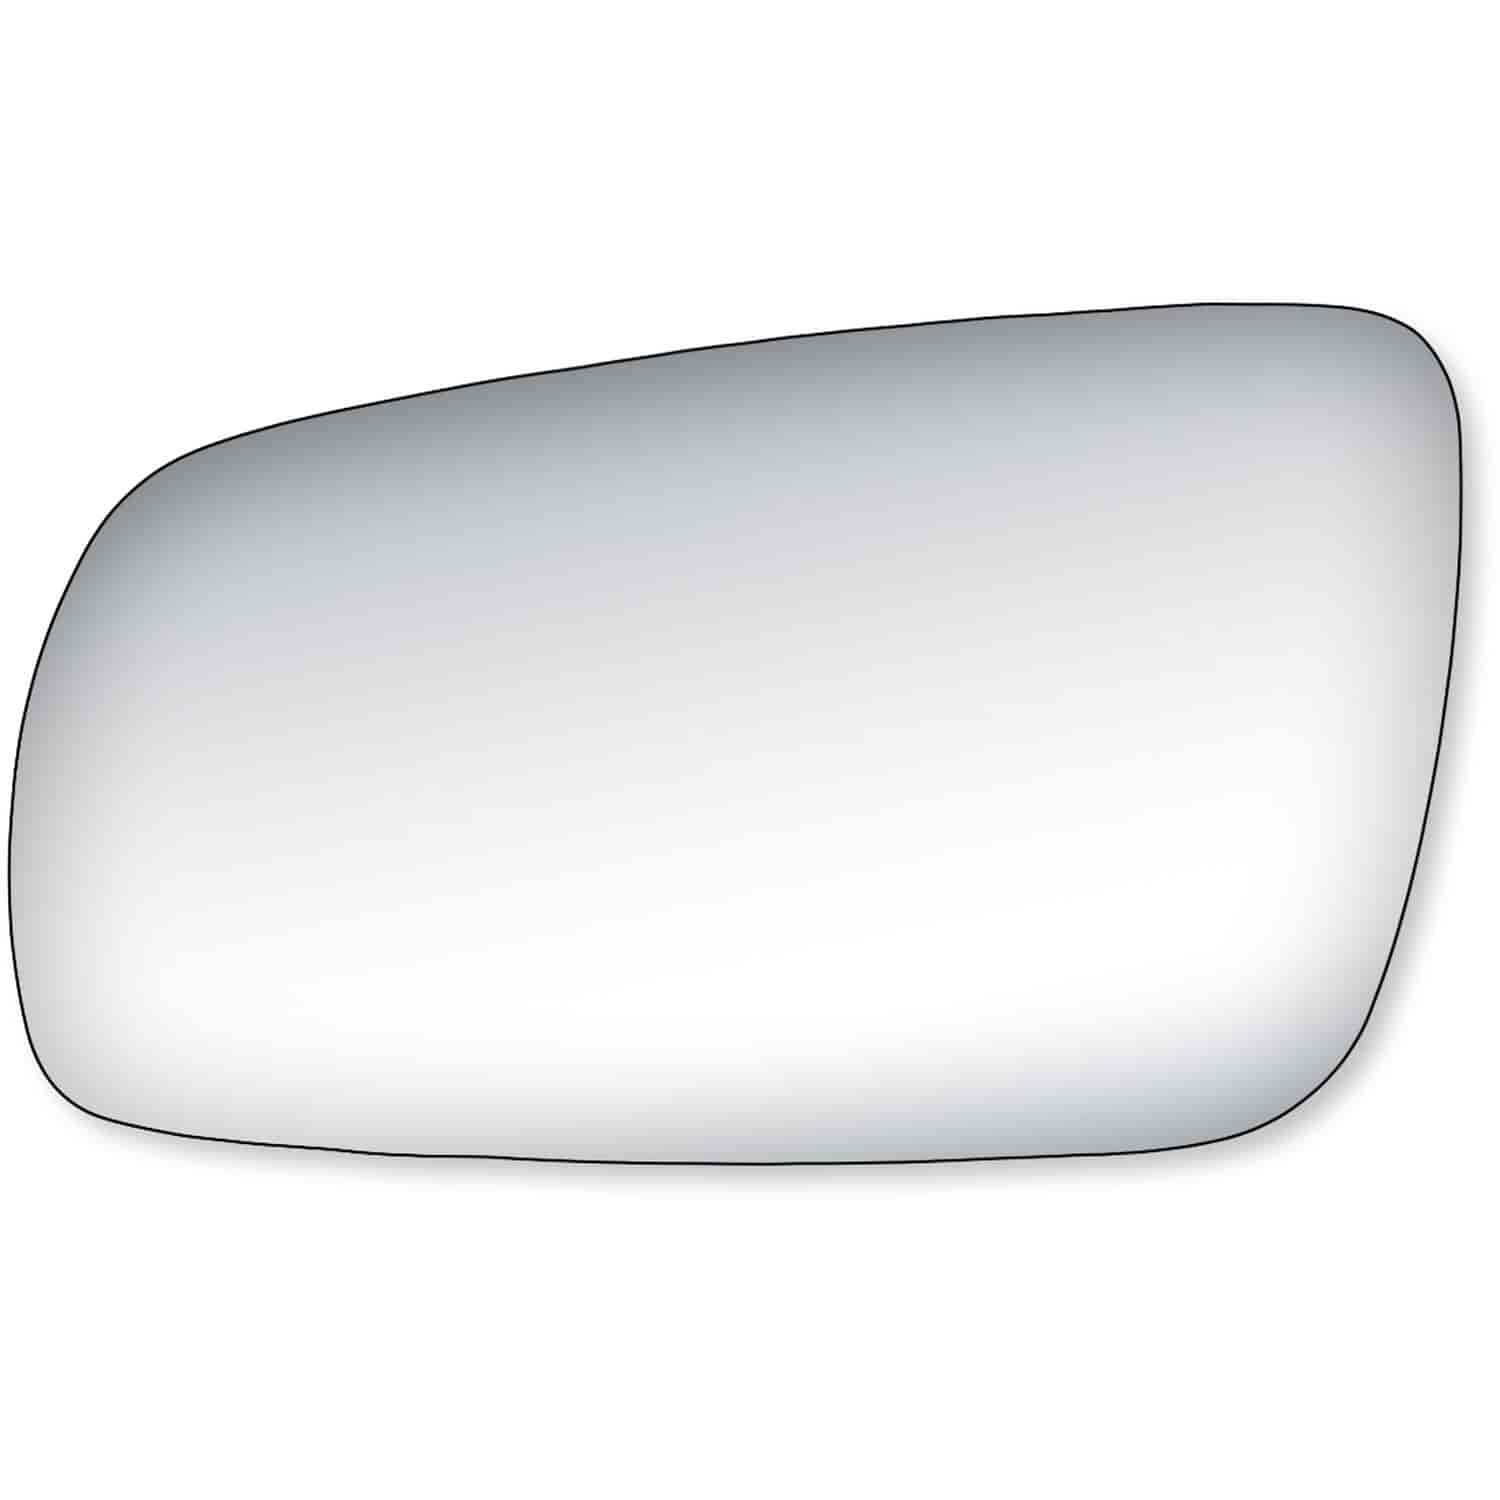 Replacement Glass for 99-05 Golf/ GTI 4th Generation chrome lens ; 99-05 Jetta 4th Generation chrome